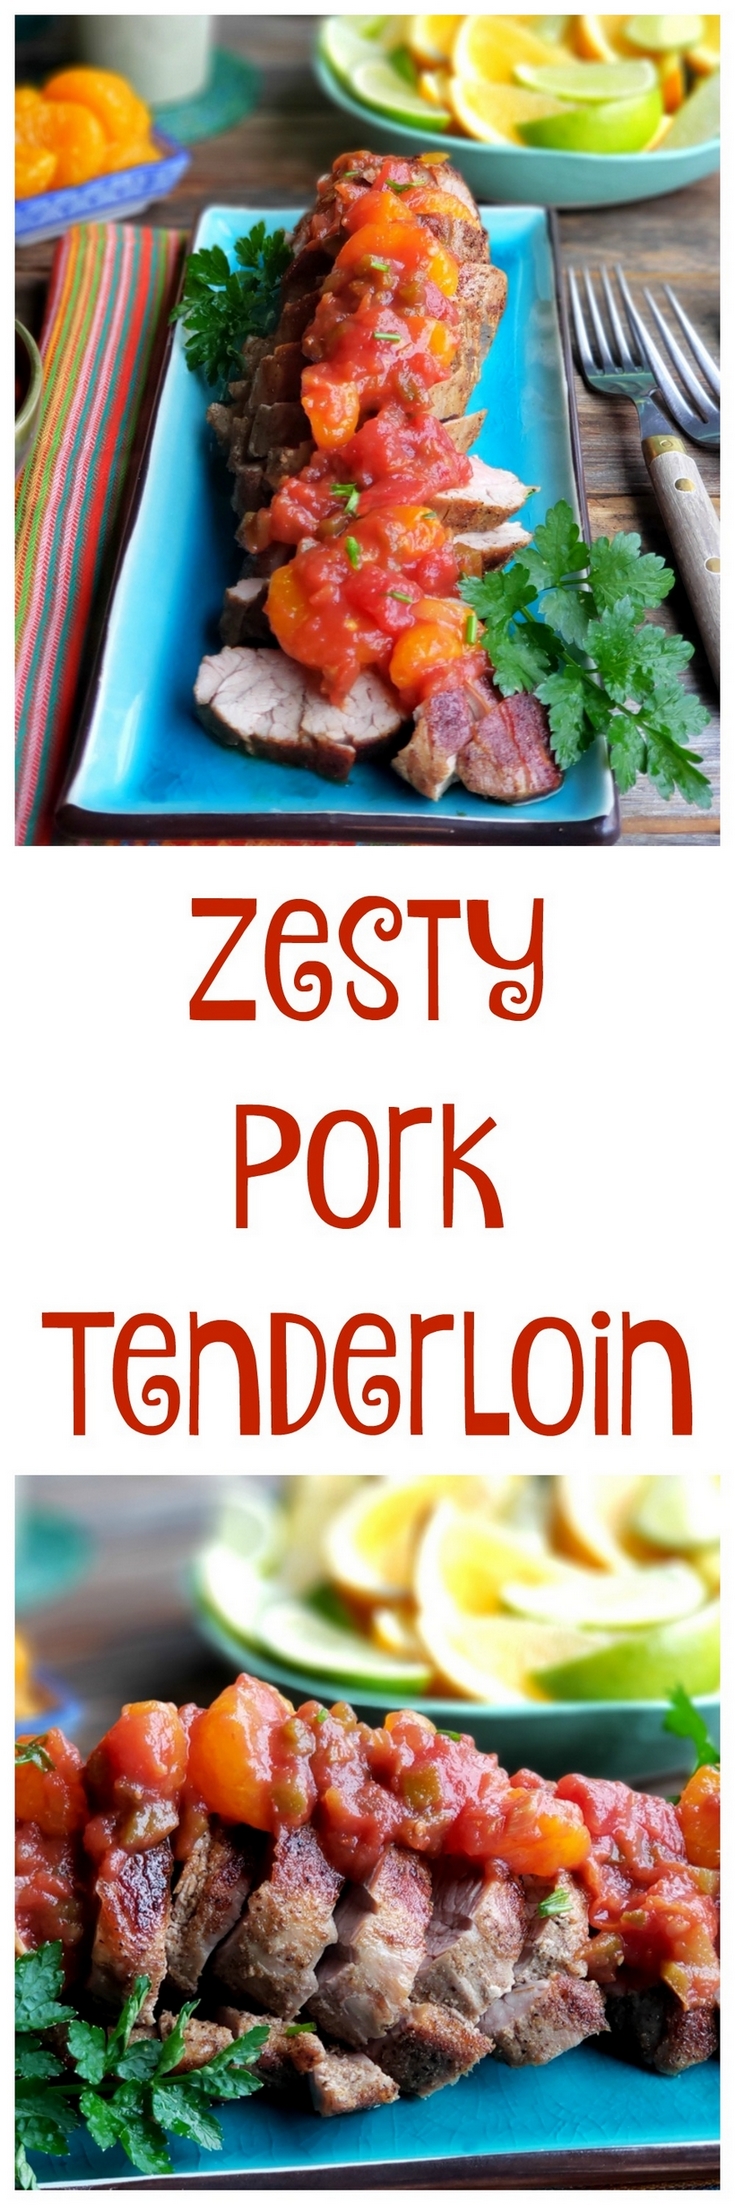 Zesty Pork Tenderloin that is quick and simple to prepare. You will absolutely love this tried and true recipe. #noblepig #pork #porktenderloin via @cmpollak1